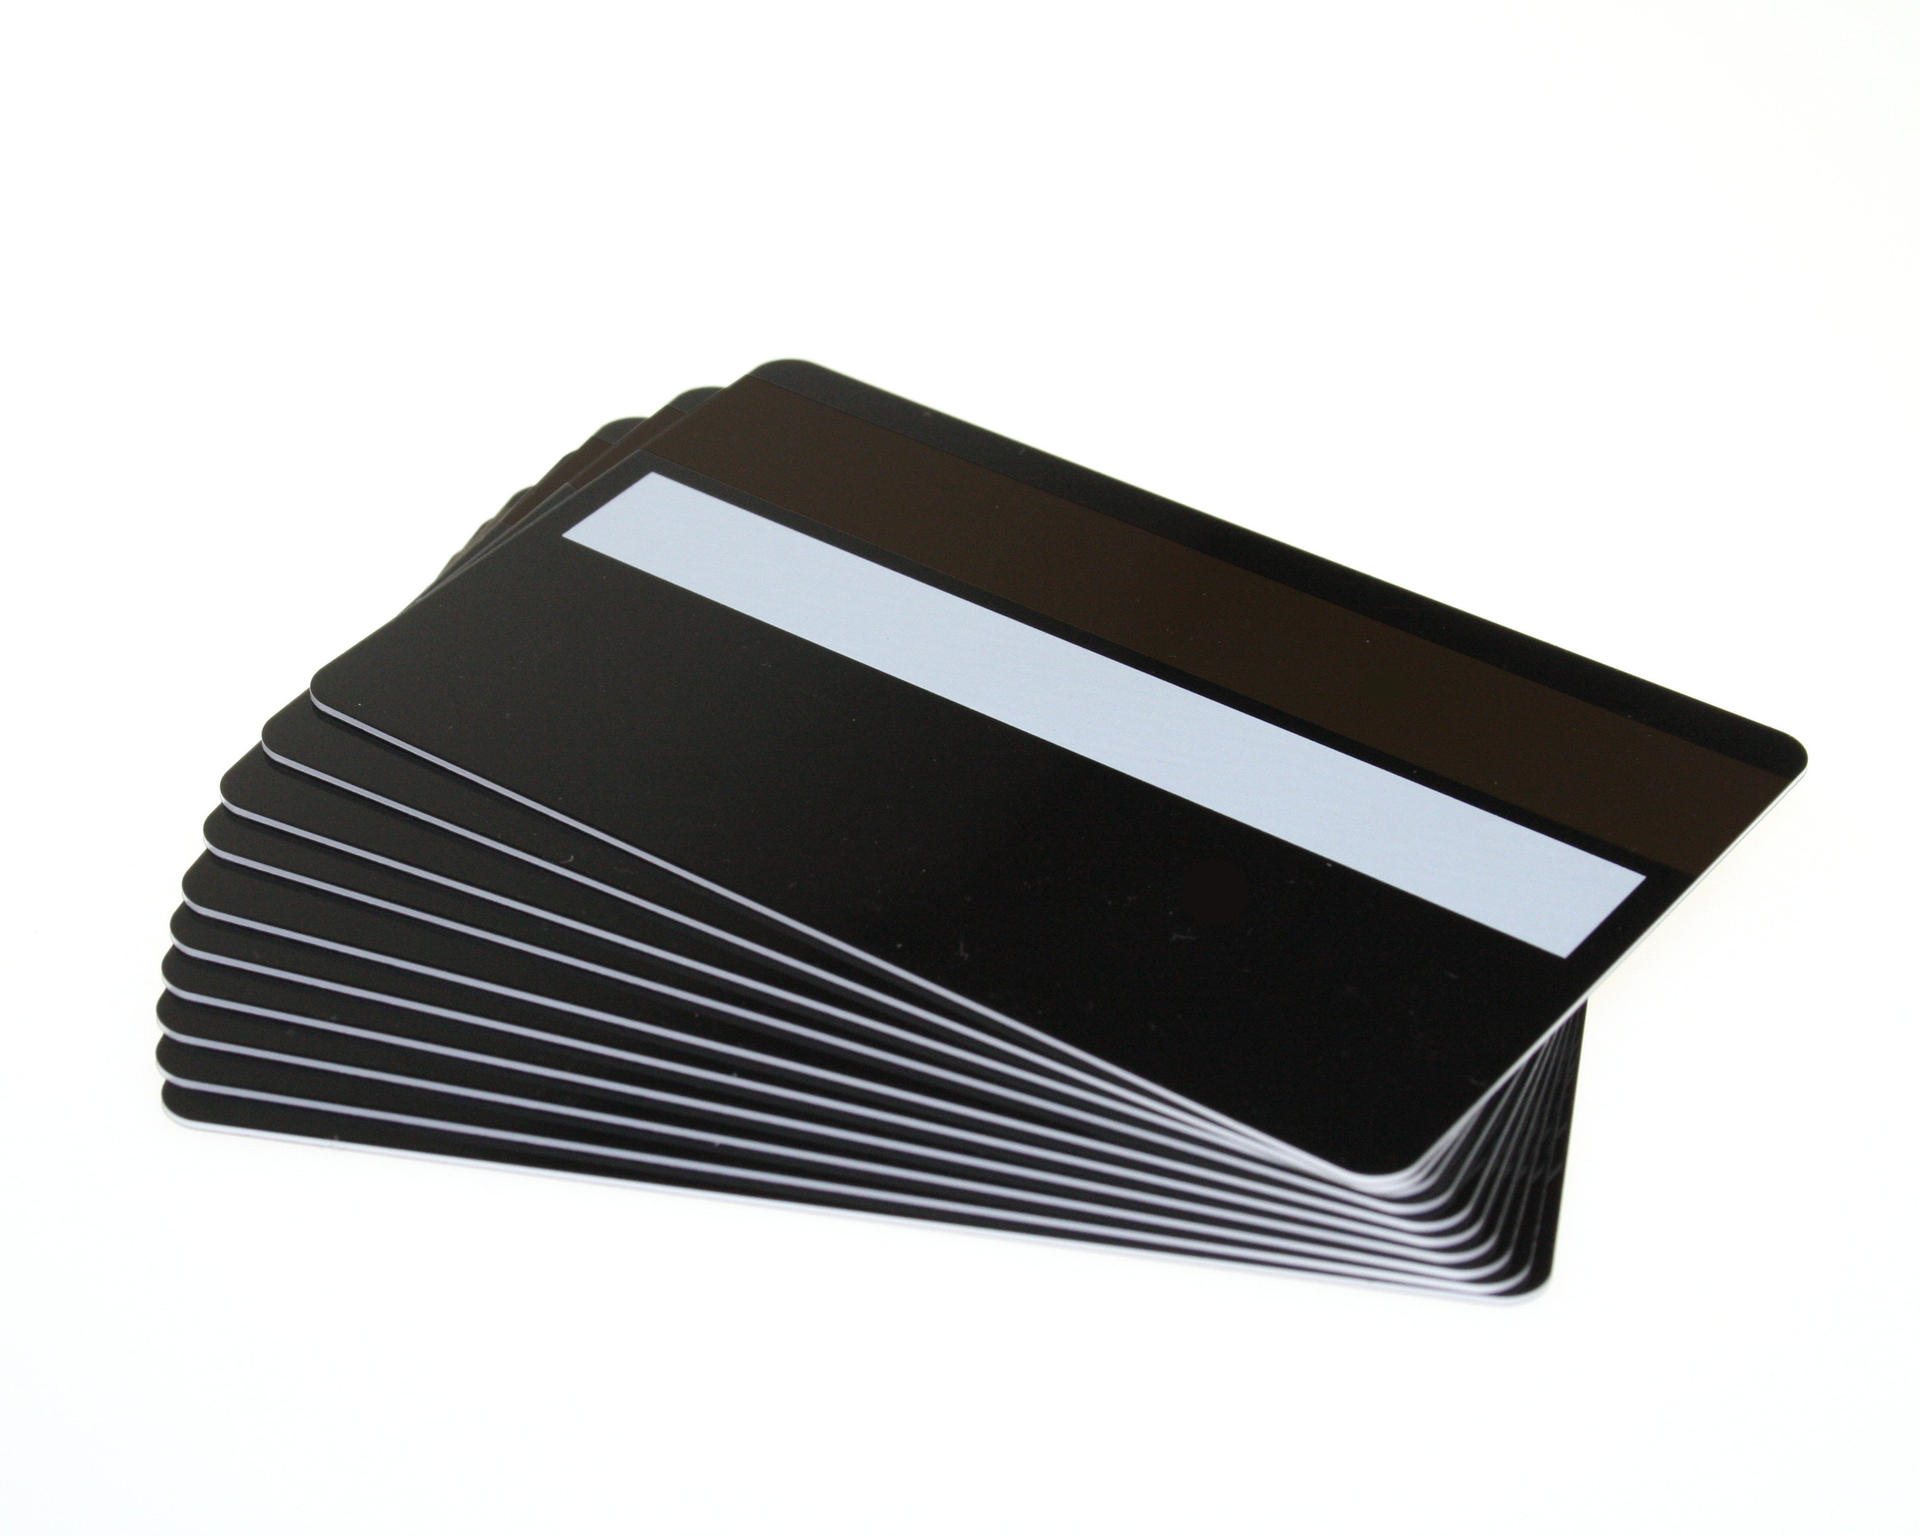 C-A7-BKHISIG_Black Gloss Premium 760 Micron Cards With Hi-Co Magnetic Stripe & Signature Strip Panel